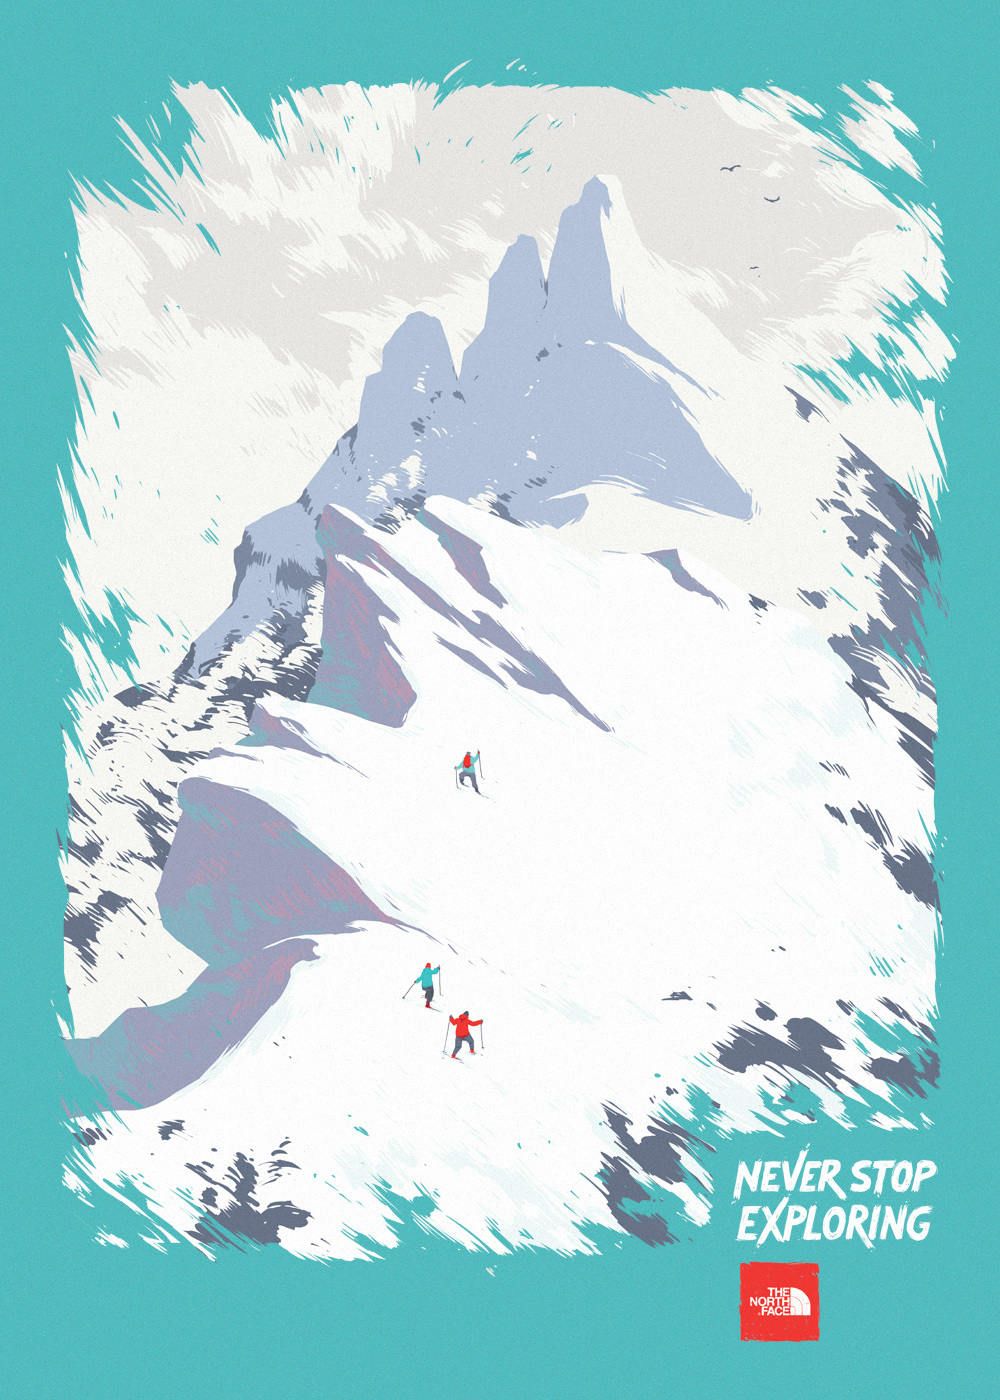 The North Face: Never Stop Exploring on Behance